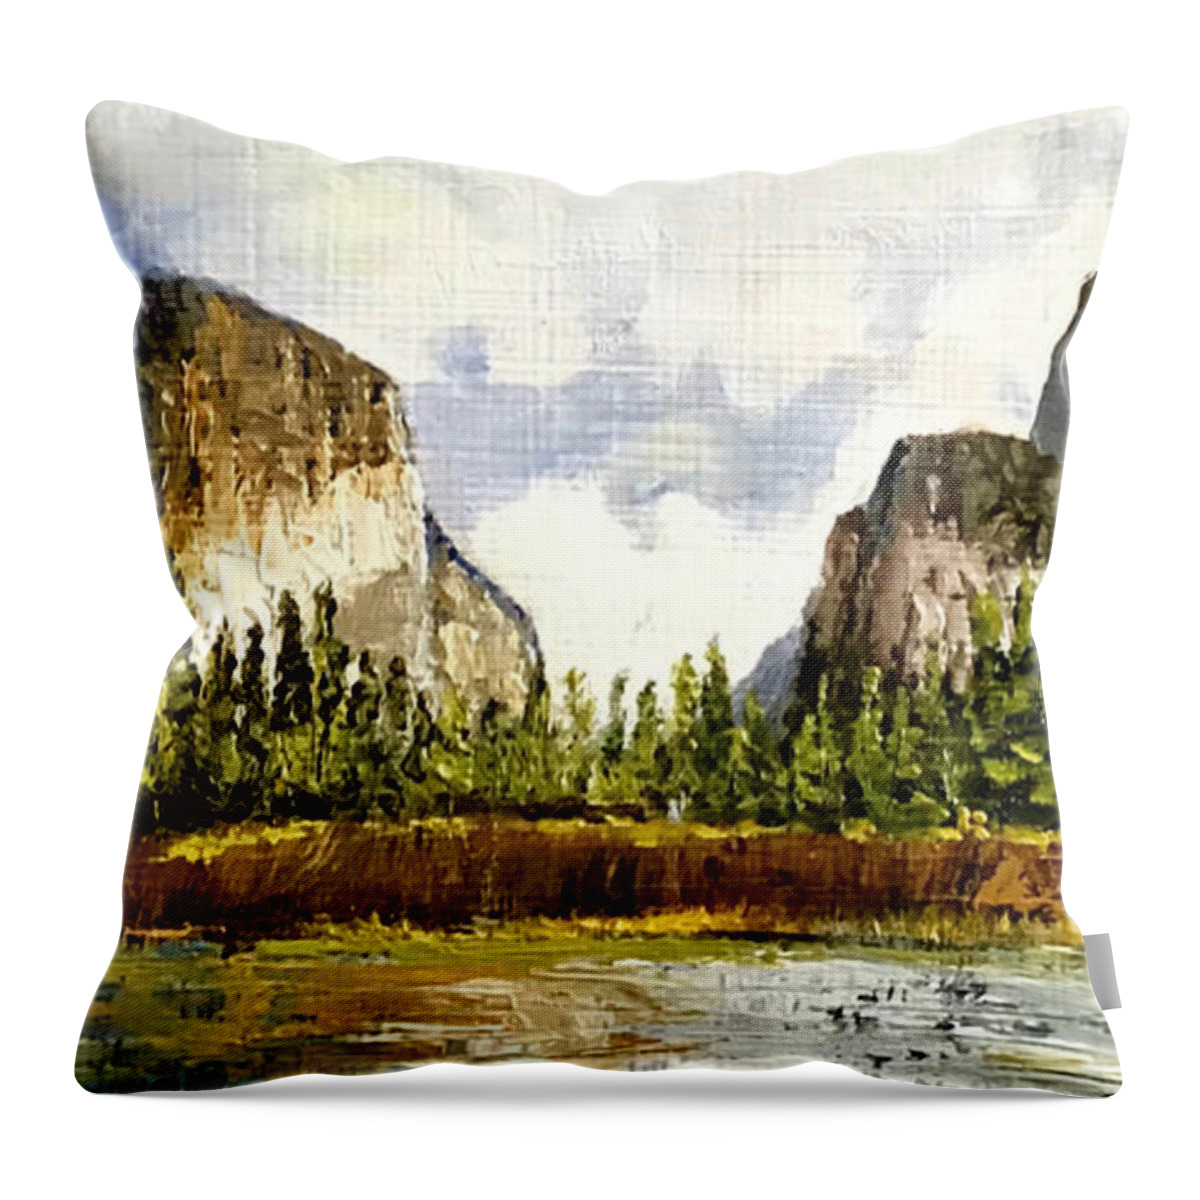 El Capitan Throw Pillow featuring the painting El Capitan by Shawn Smith